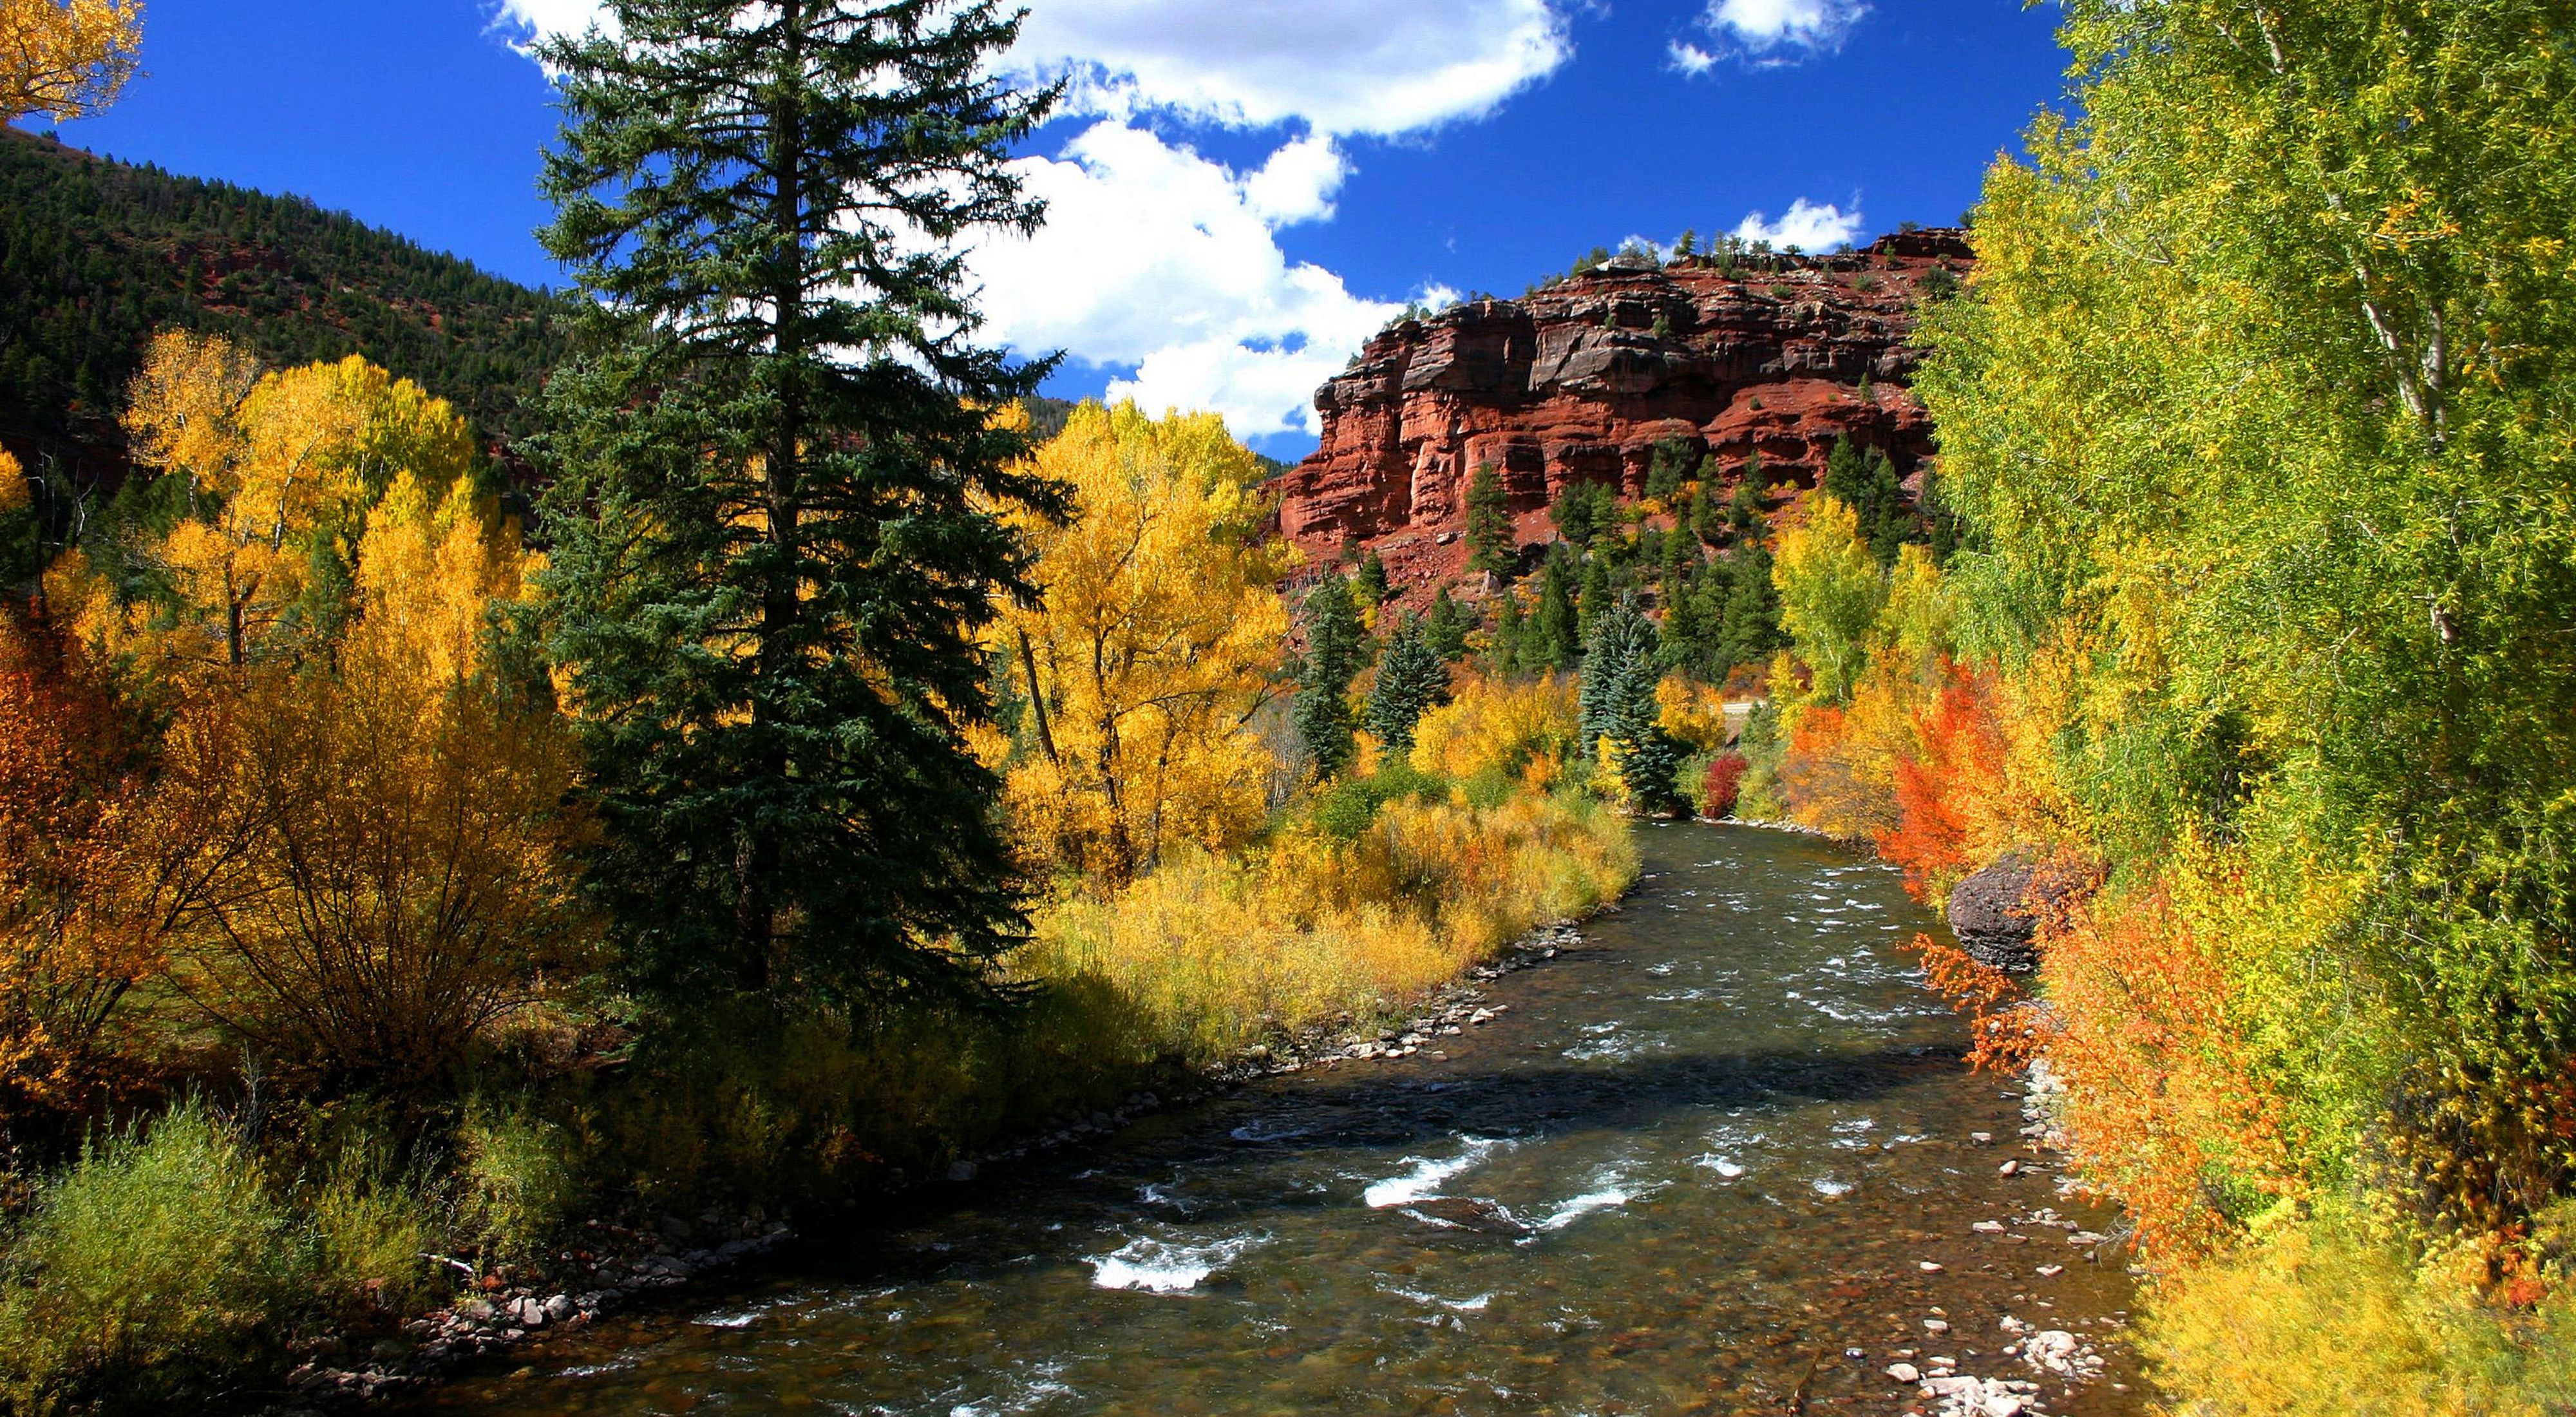 The San Miguel River meanders through tall red-colored rock walls and autumn-colored trees that line the shore at San Miguel Canyon Preserve in Colorado.